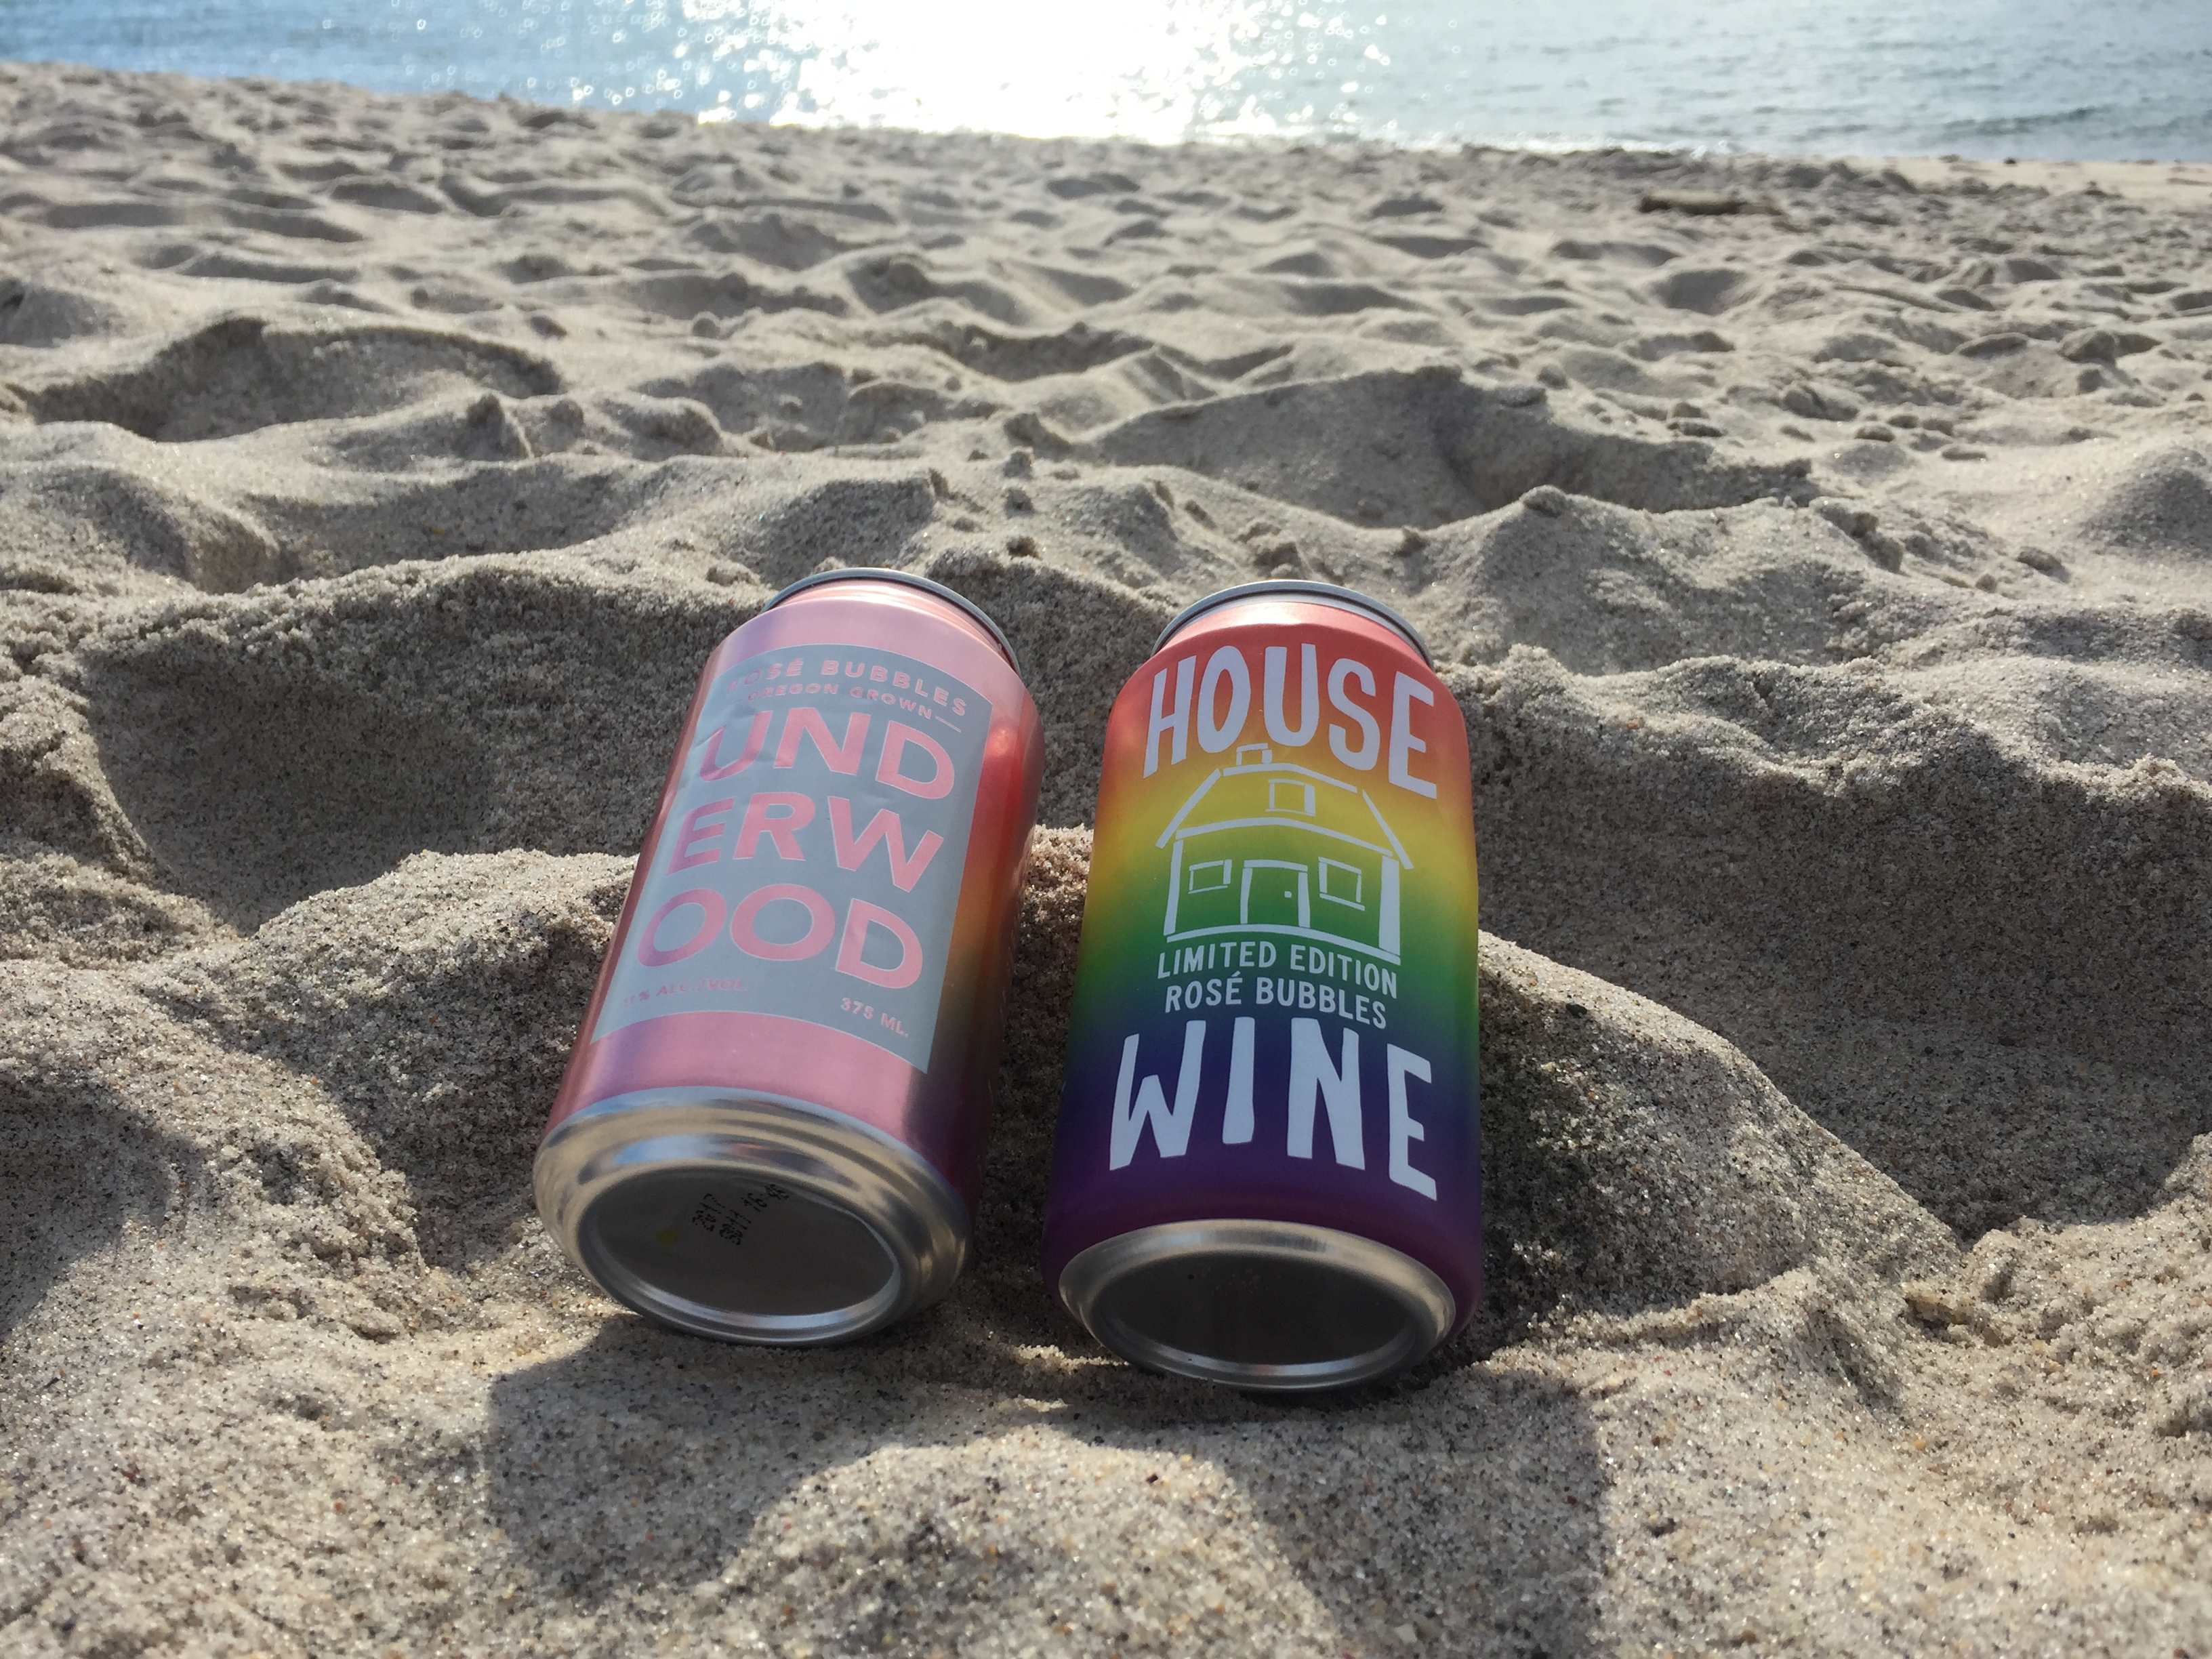 Monte Belmonte Wines: Is the wine world ready for wine in a can?